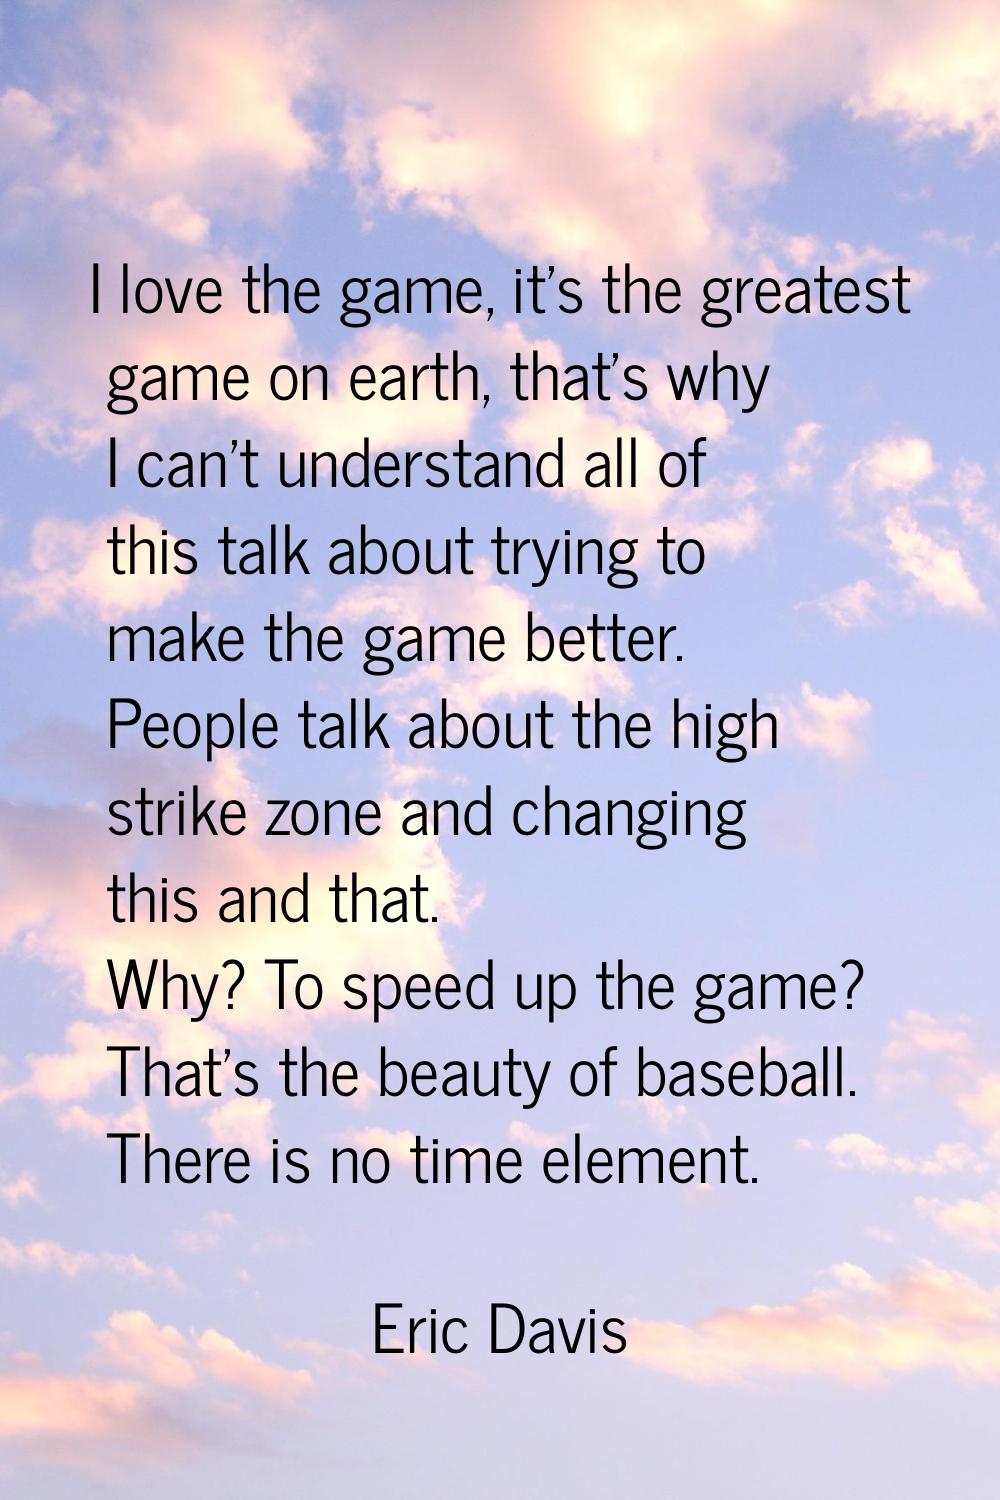 I love the game, it's the greatest game on earth, that's why I can't understand all of this talk ab